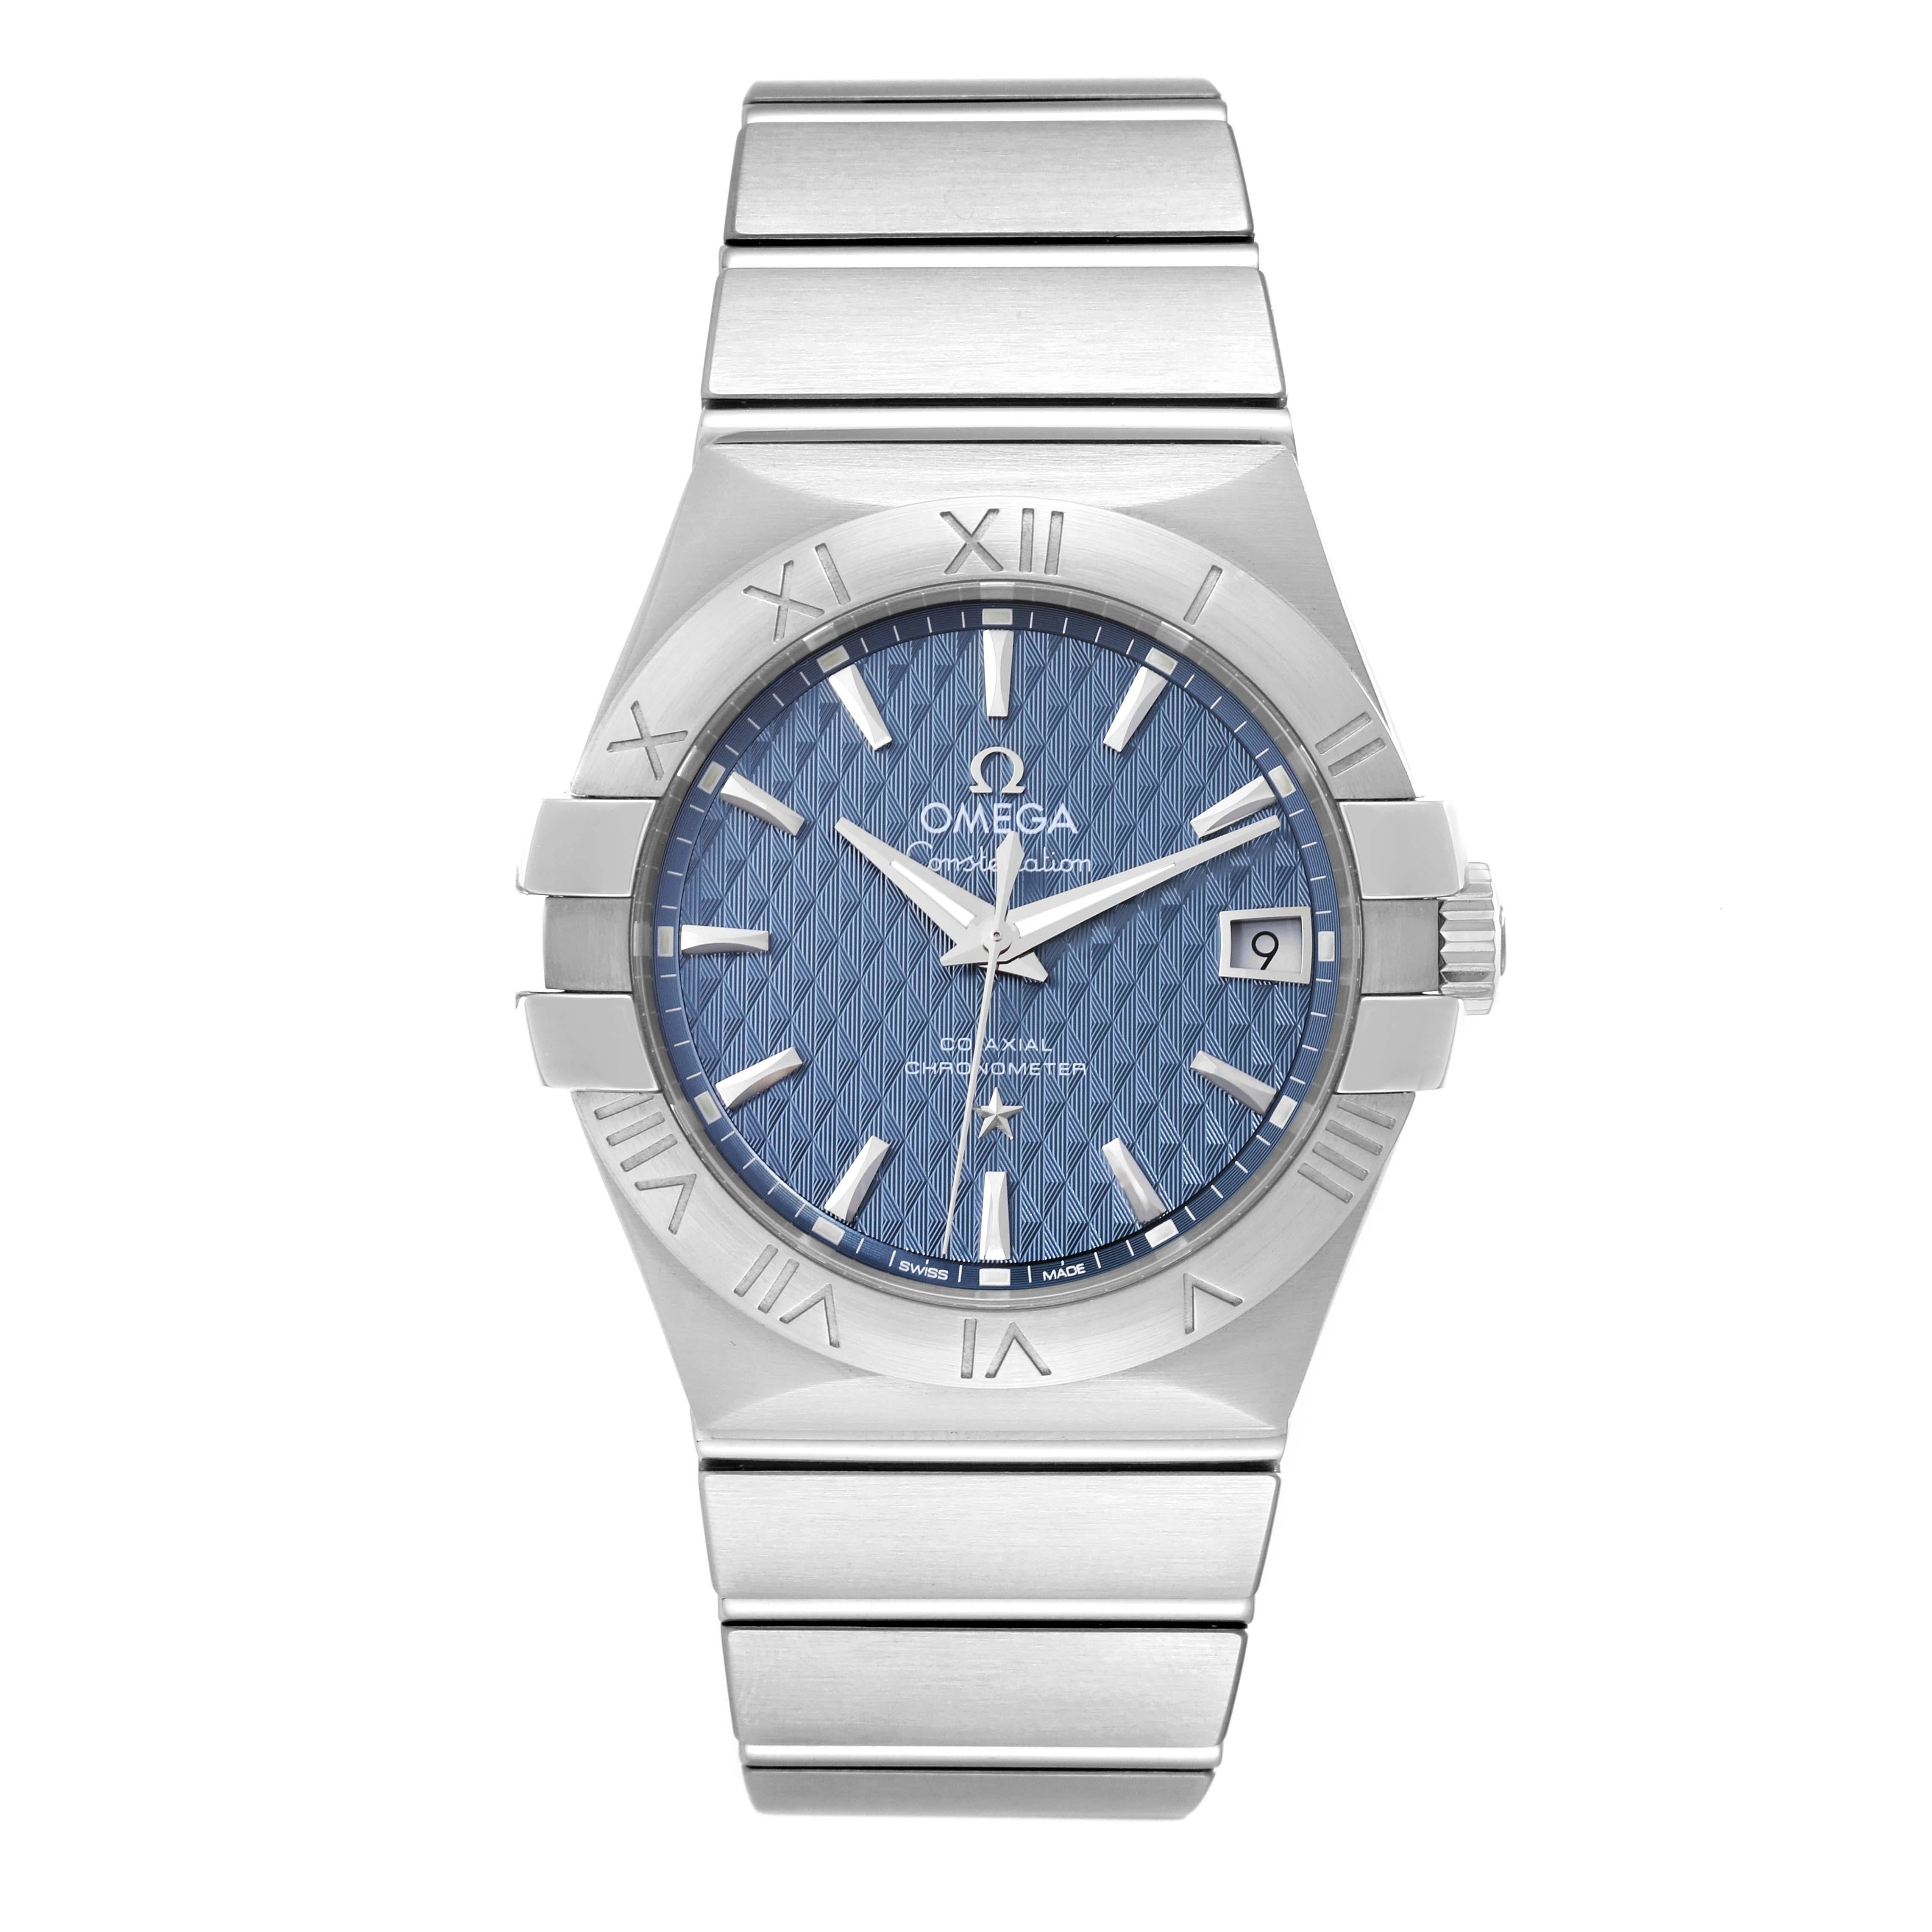 Omega Constellation 35mm Blue Dial Steel Mens Watch 123.10.35.20.03.002 Box Card. Automatic self-winding chronometer, Co-Axial Escapement movement. Stainless steel case 35.0 mm in diameter. Omega logo on a crown. Exhibition transparent sapphire